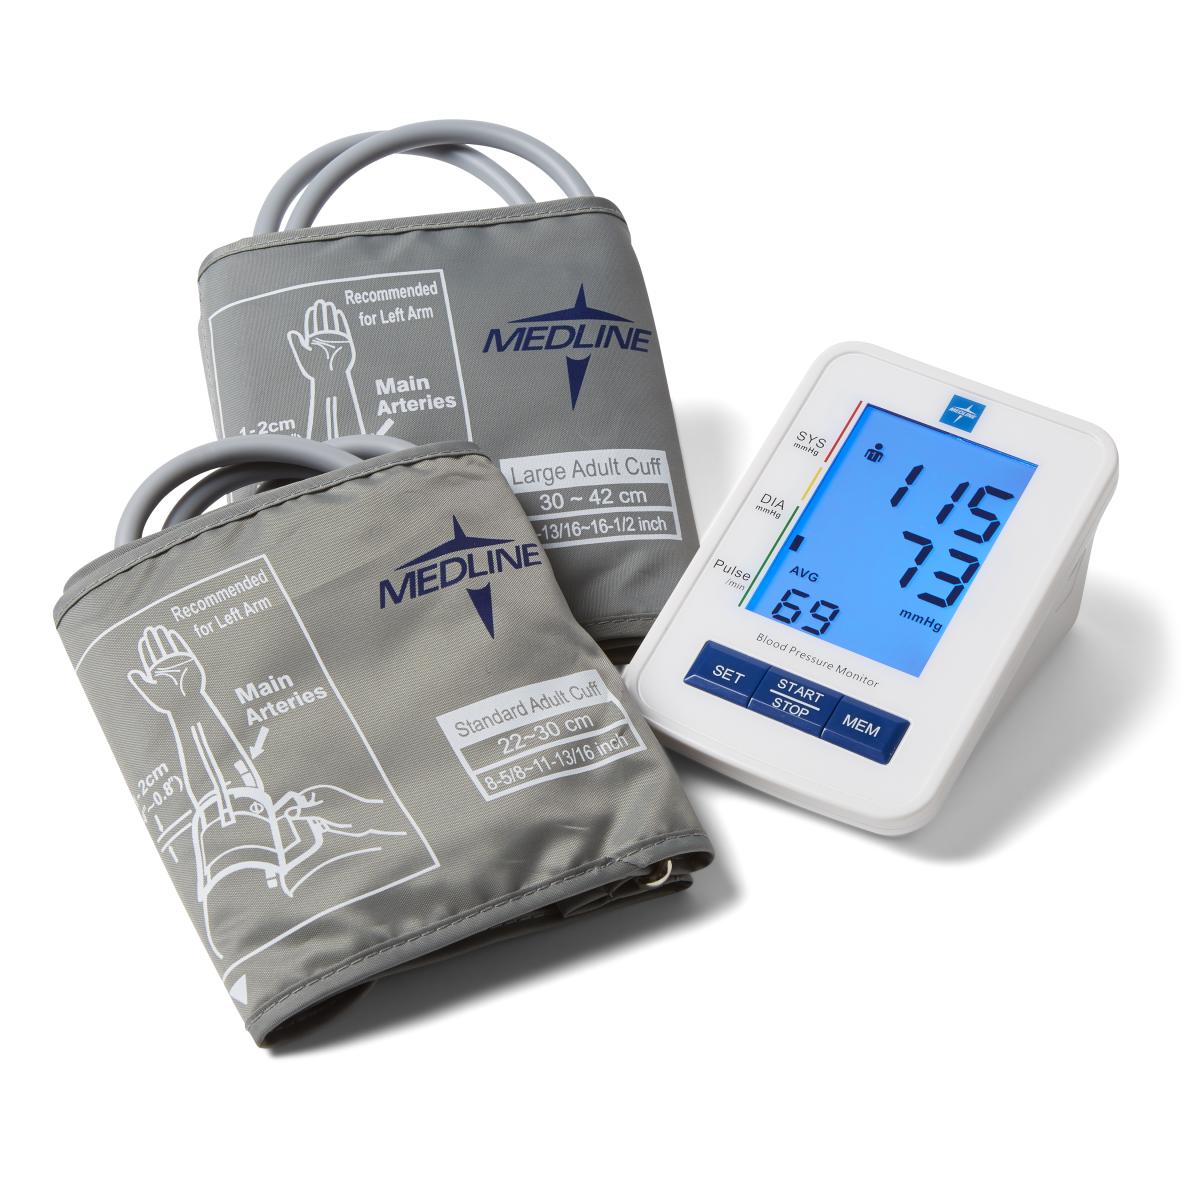 https://www.rehabmart.com/imagesfromrd/Automatic_Blood_Pressure_Monitor_Adult_and_XL_Cuffs_MDS4001PLUS.jpg